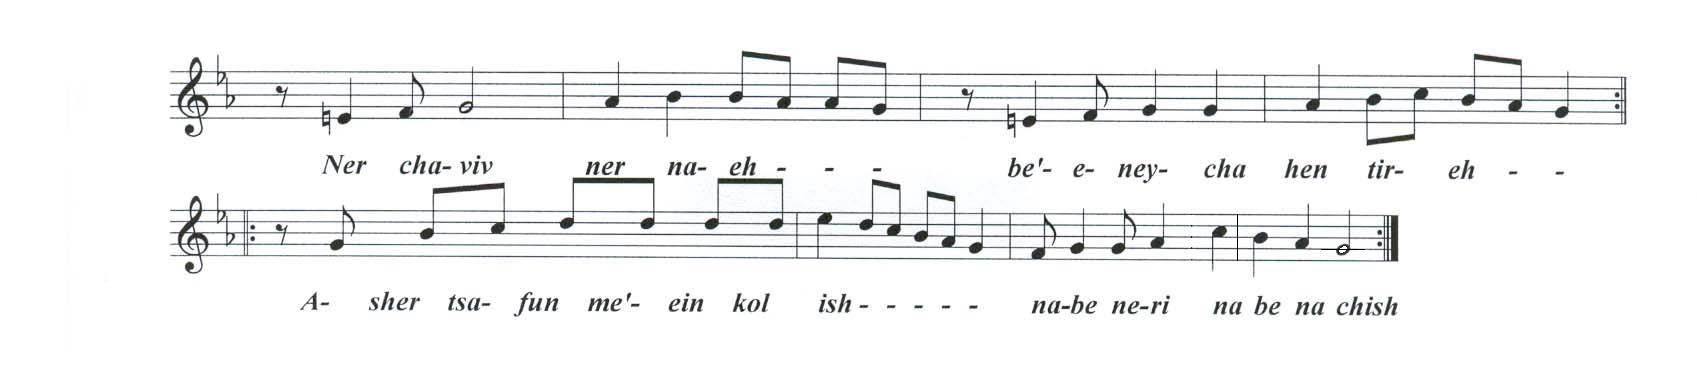 Transcription of the song